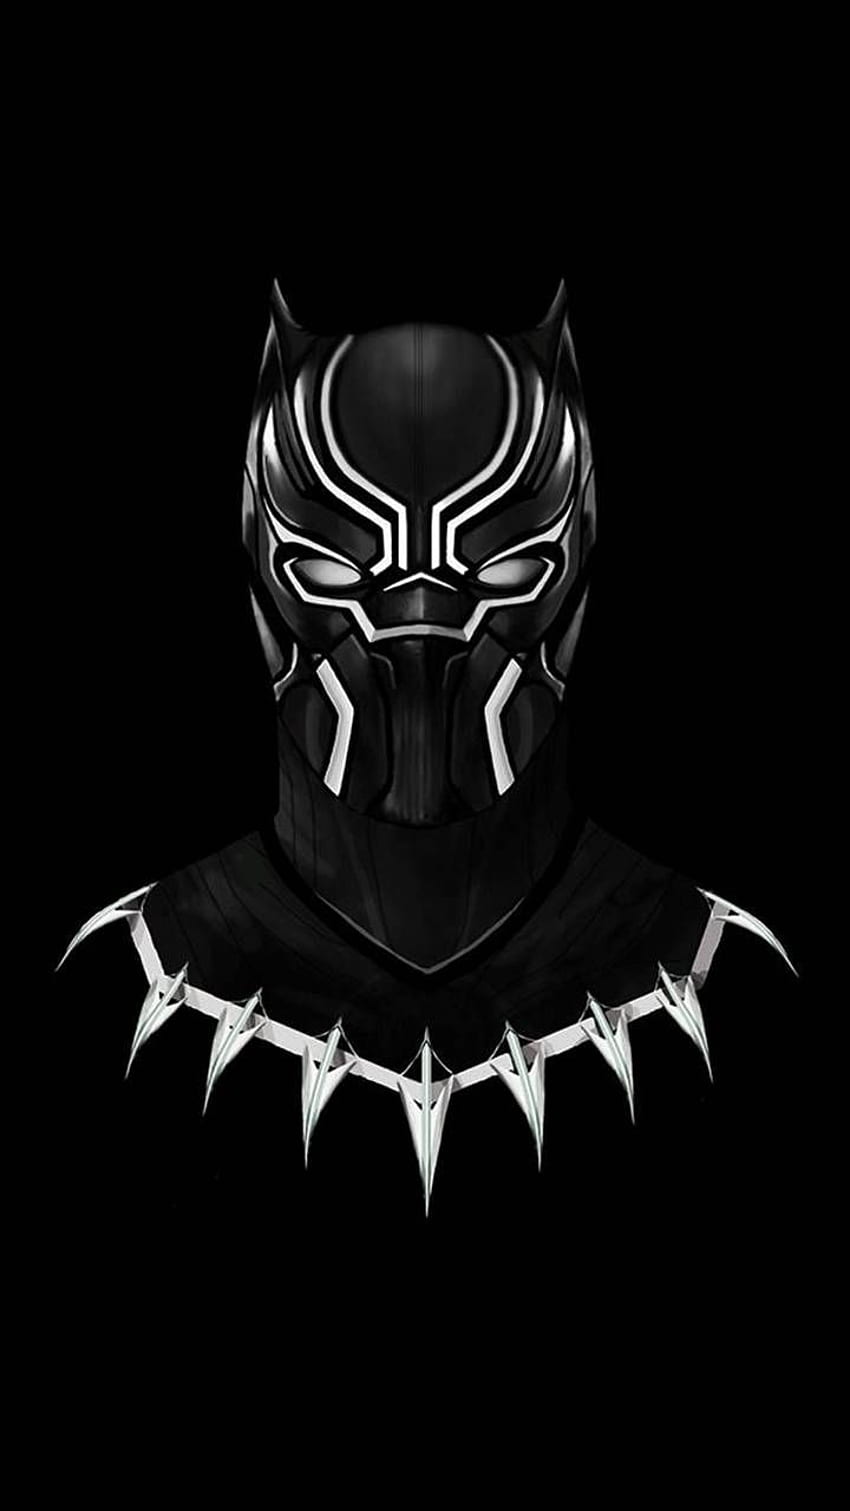 High Definition . . Black, White and Black Panther HD phone wallpaper